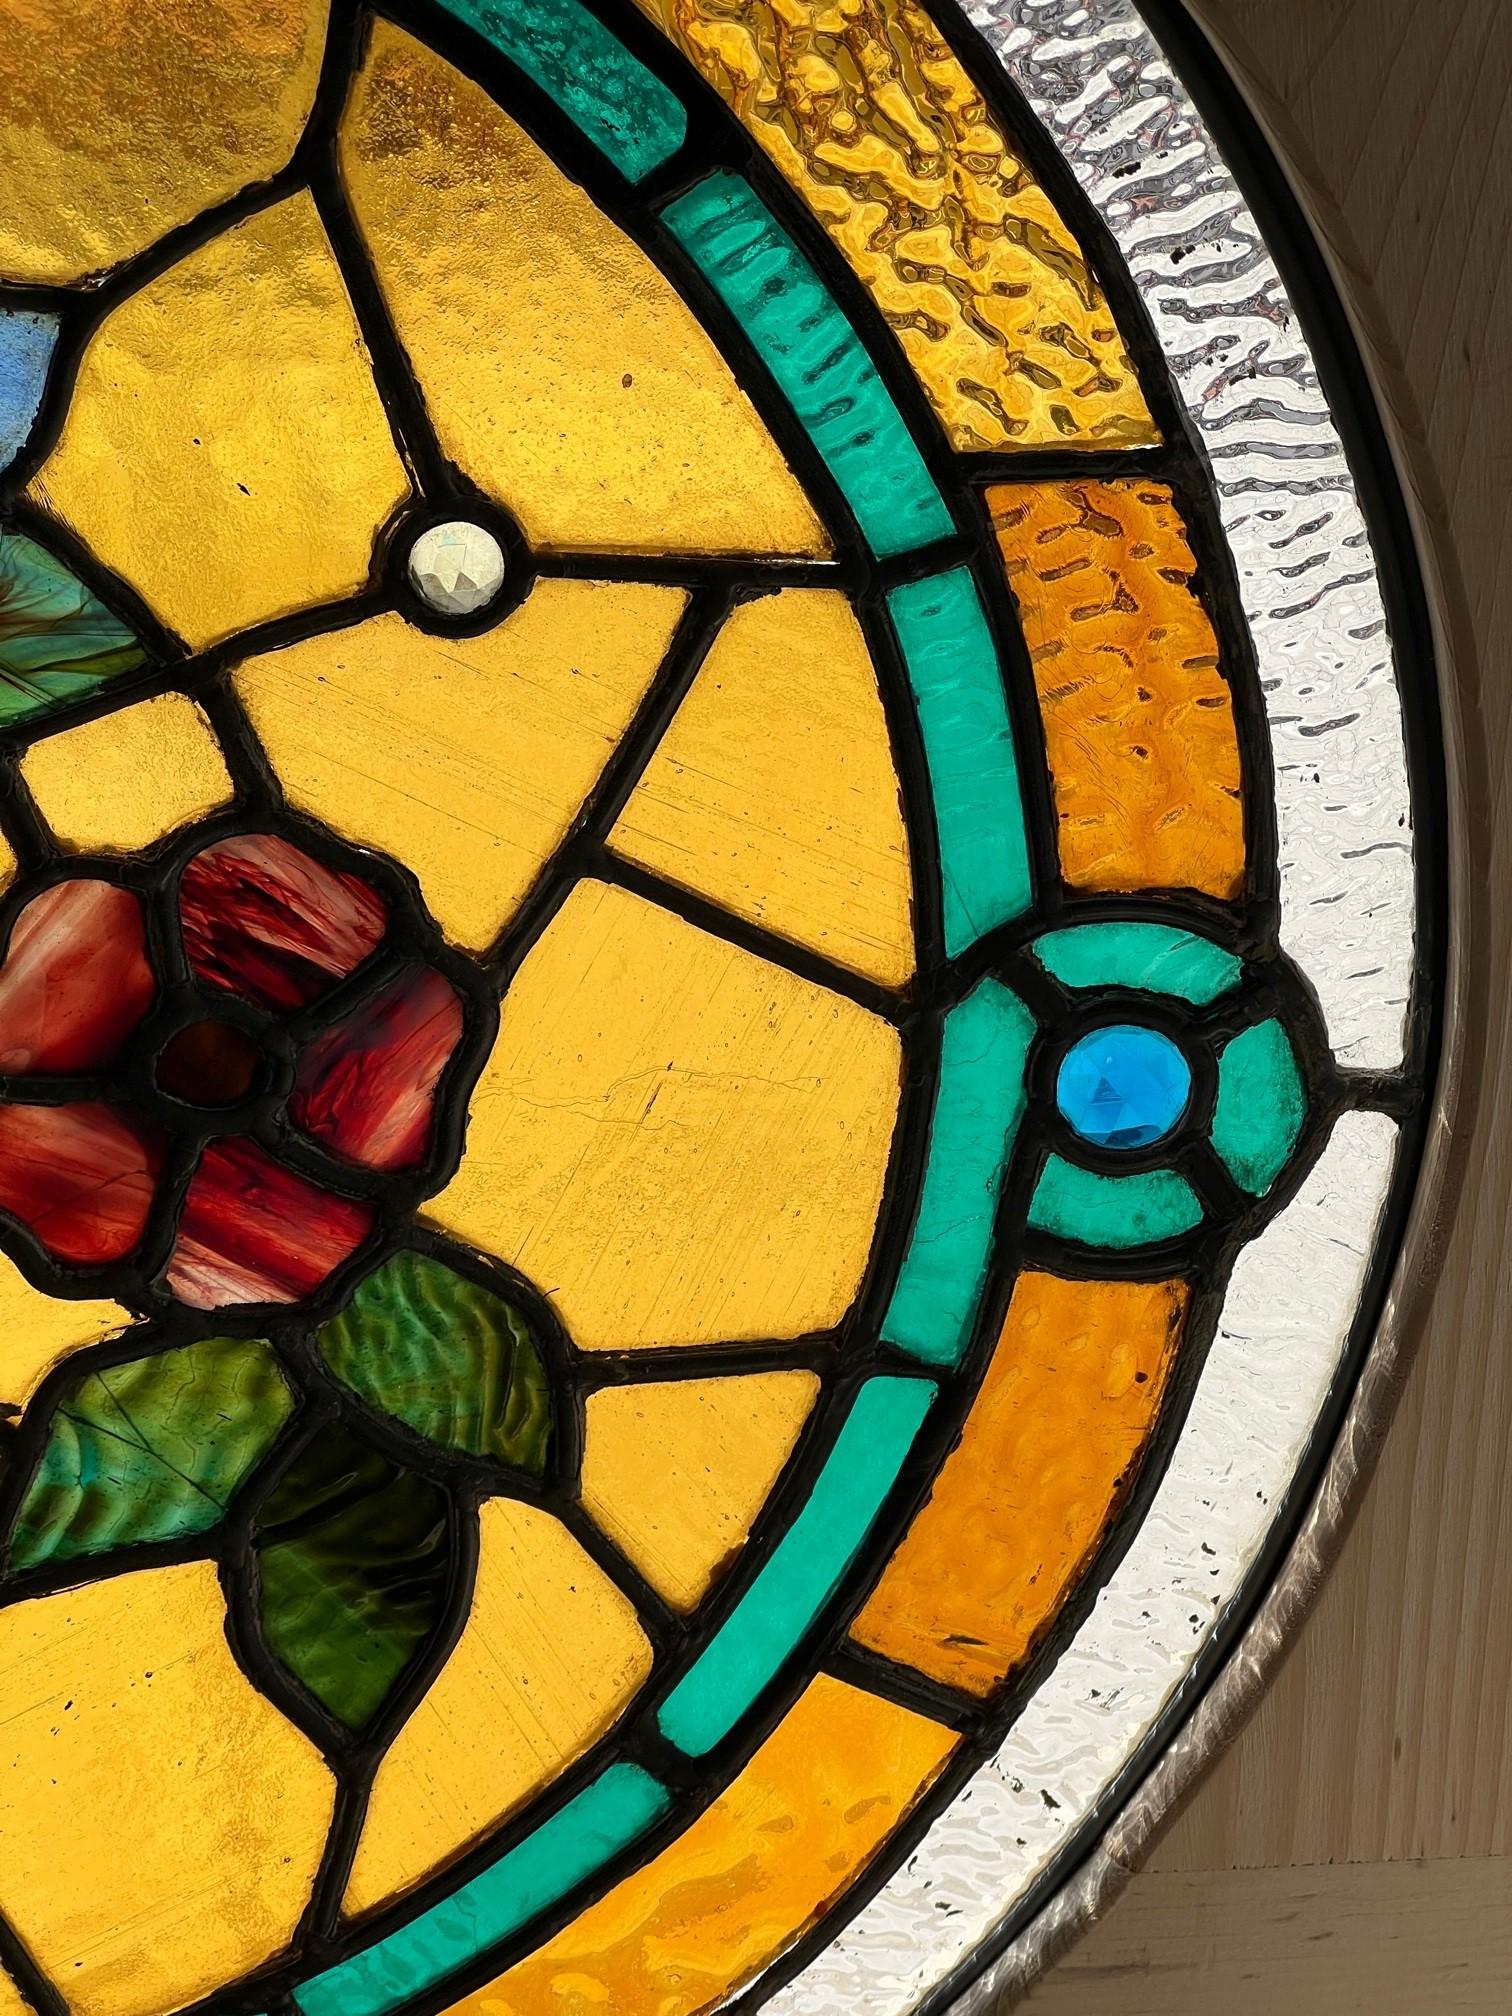 stained glass circle window